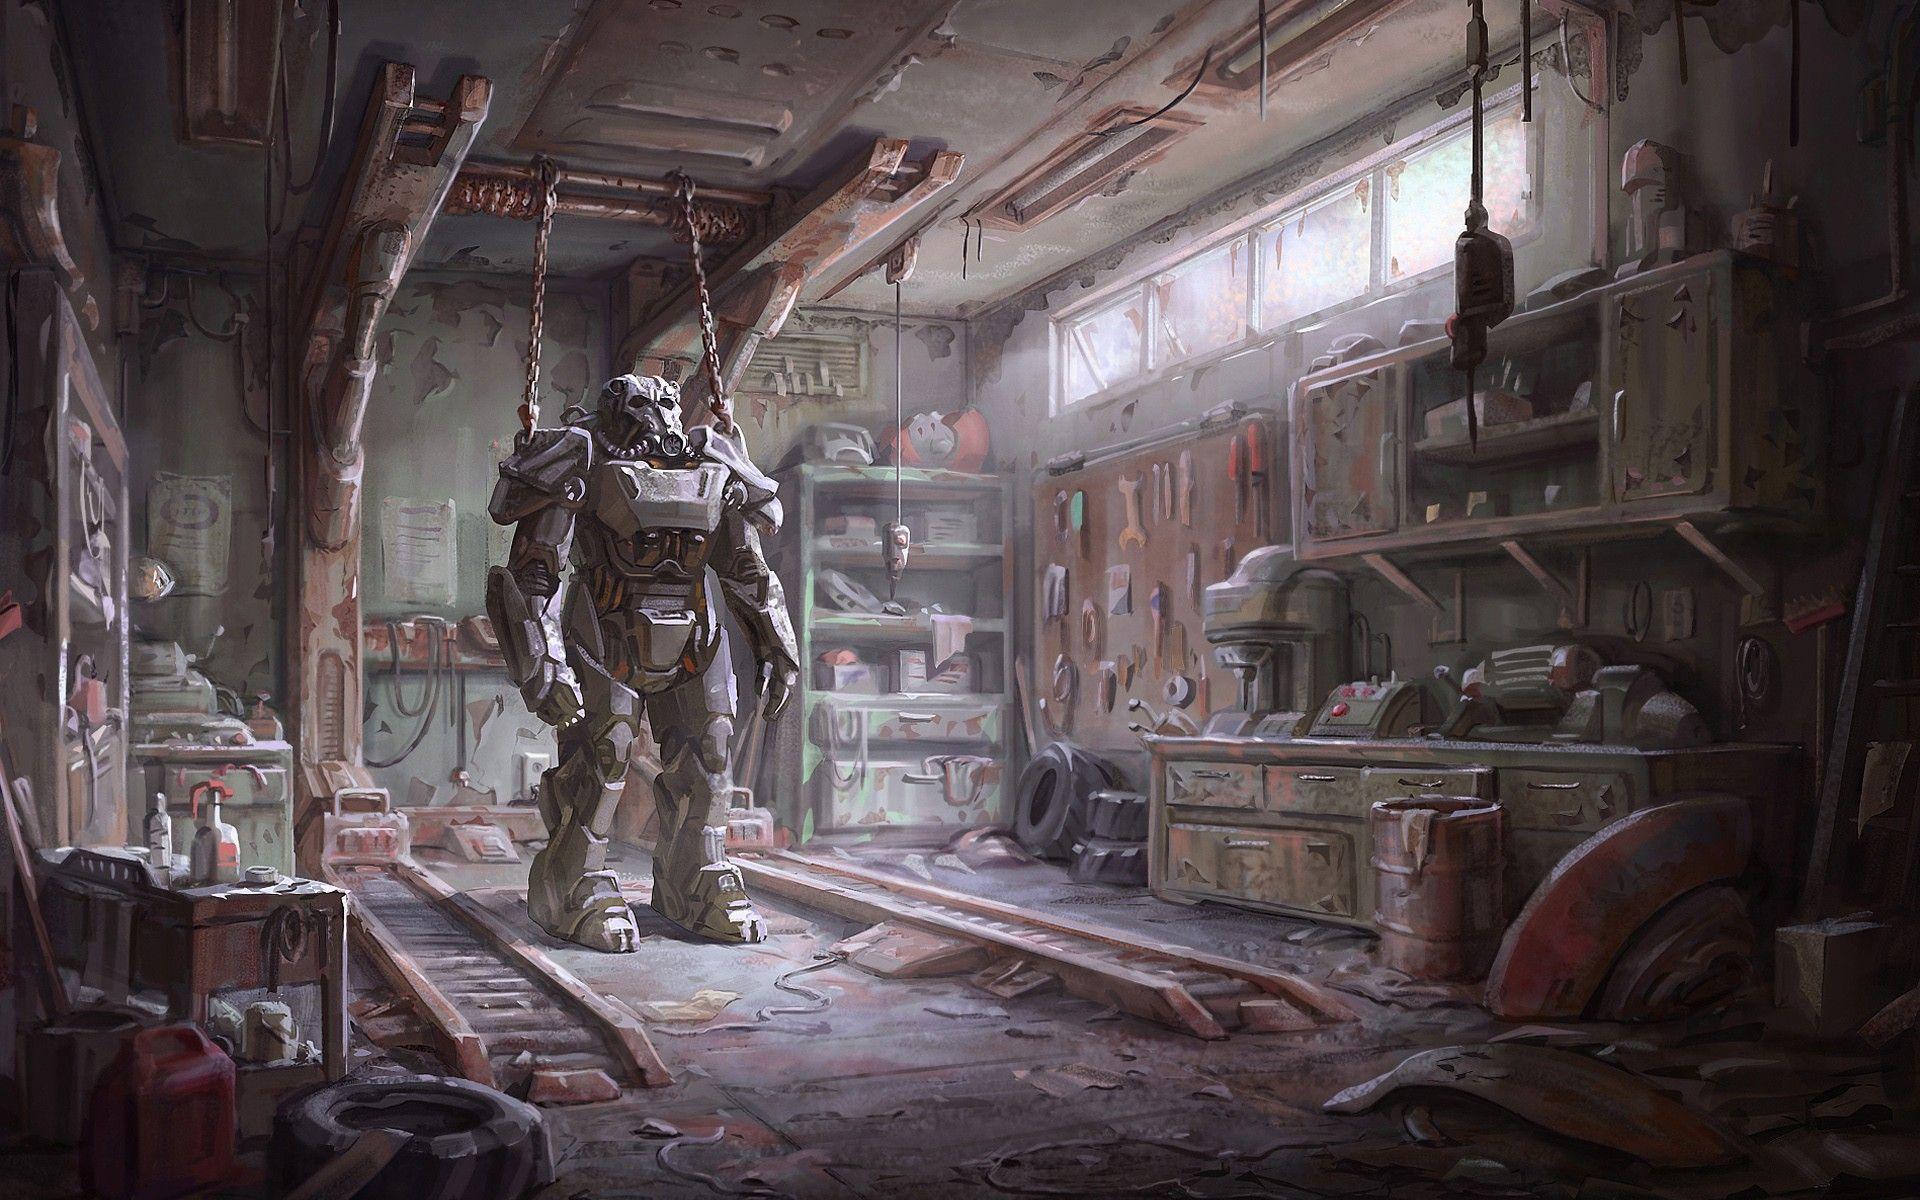 Fallout 4 4k Wallpapers Top Free Fallout 4 4k Backgrounds Wallpaperaccess